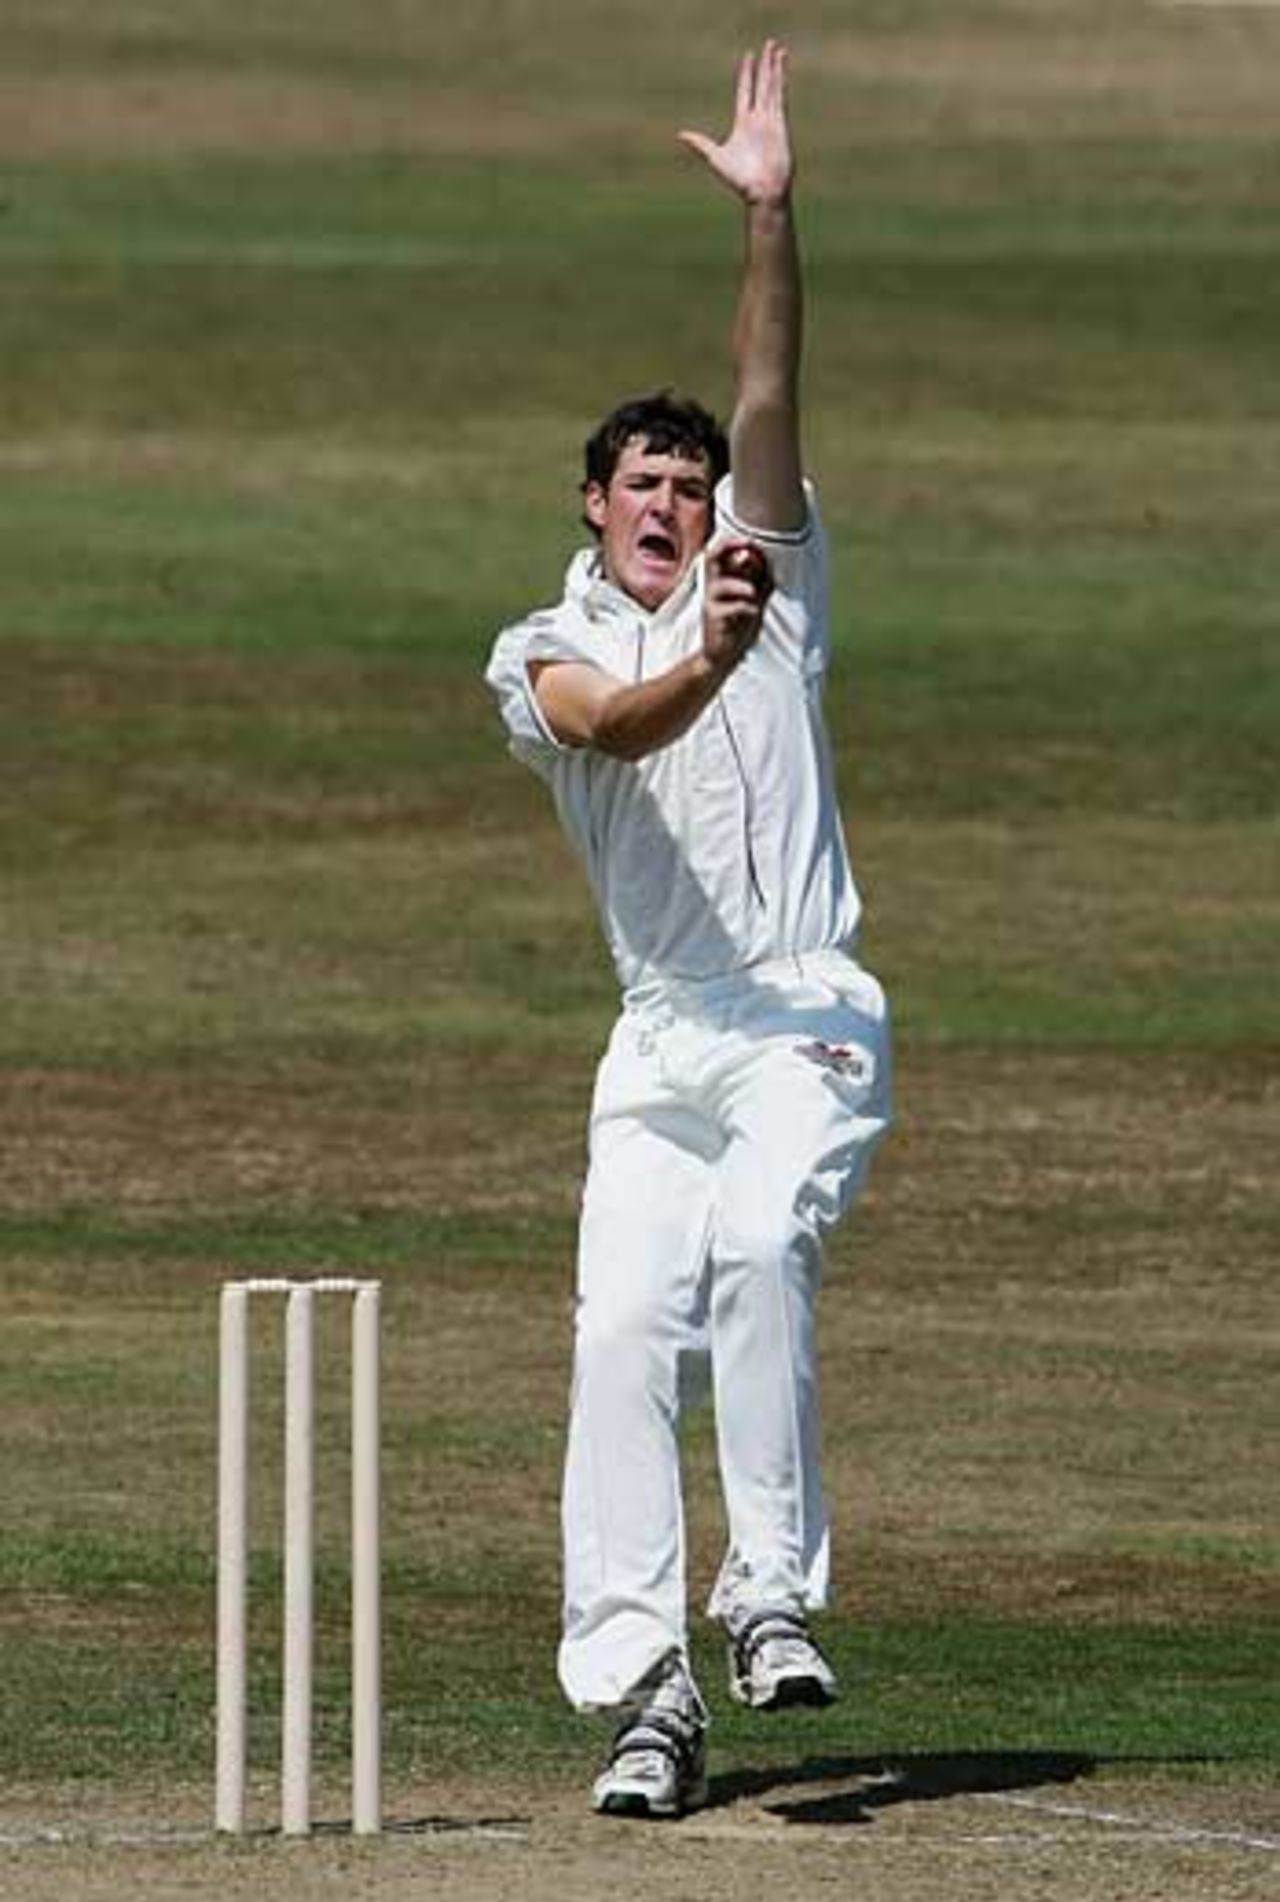 Andrew Miller roars into bowl as England Under-19s search for wickets, England Under-19 v India Under-19, 2nd Test, Taunton, August 2, 2006